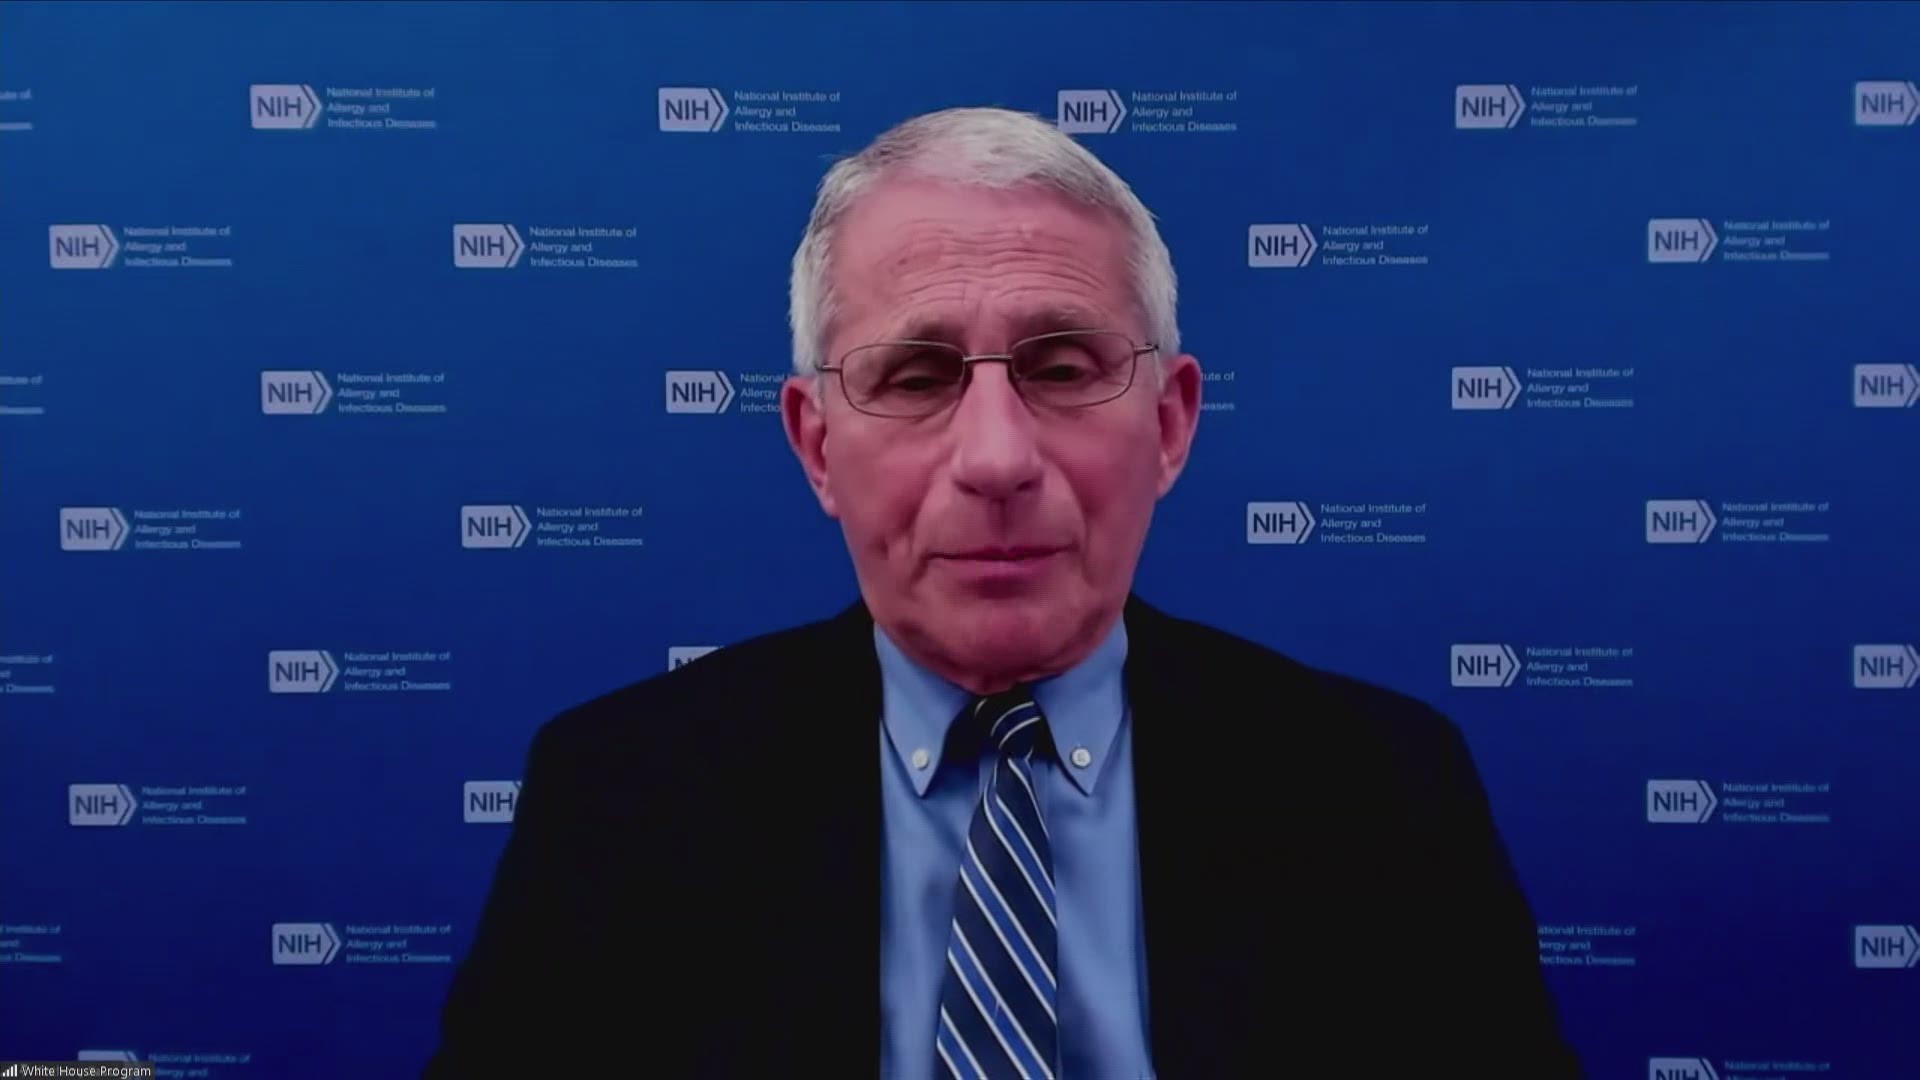 Dr. Anthony Fauci updated the public on the United States' efforts to slow the spread of COVID-19 and push out vaccines.